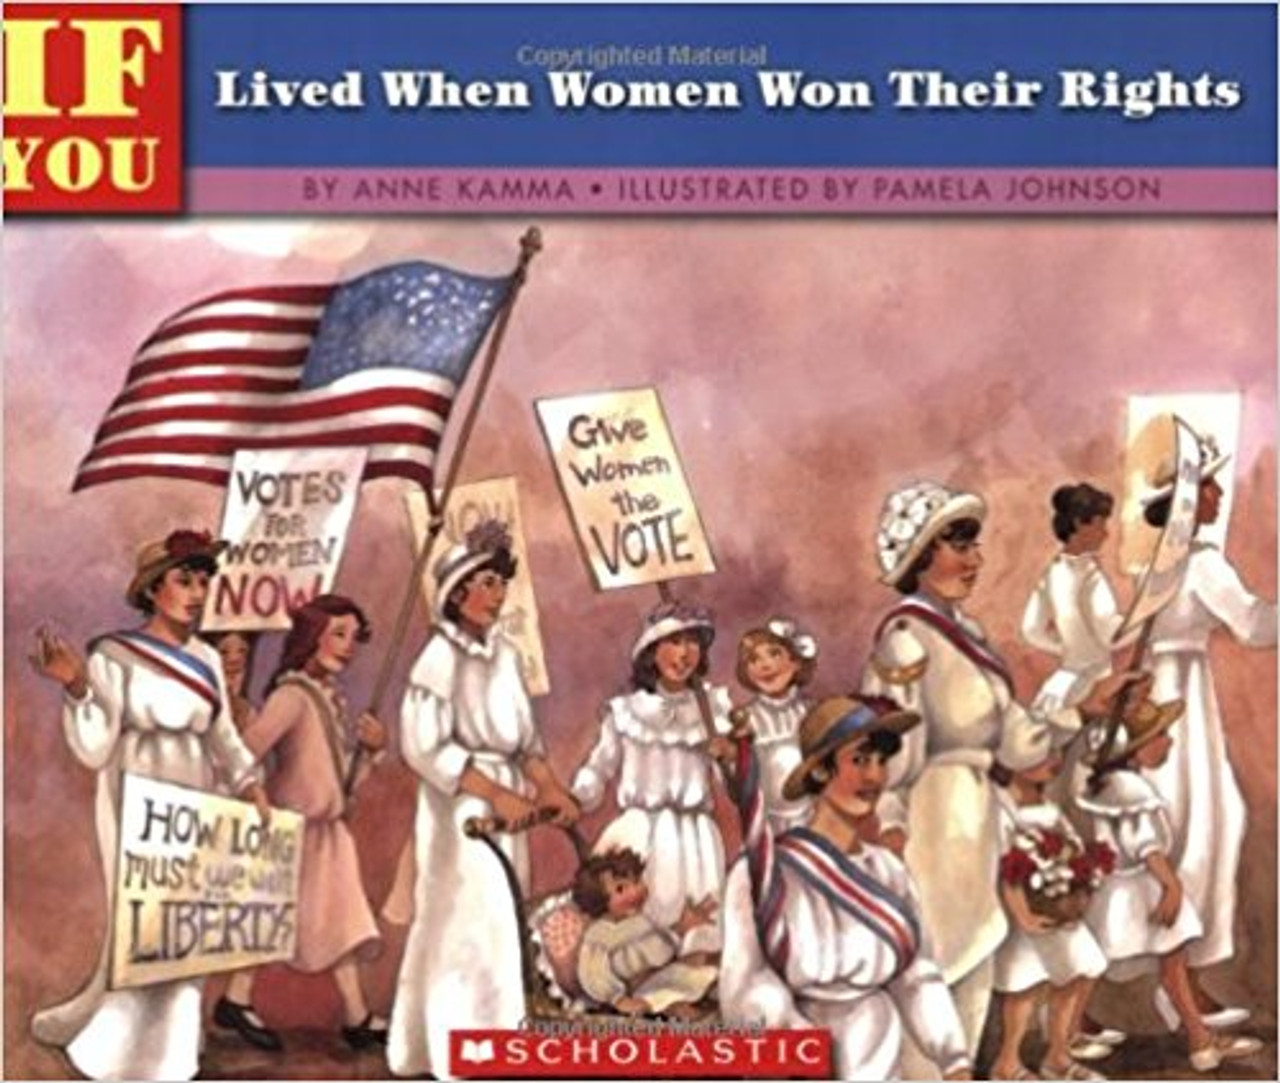 In the familiar question-and-answer format, this installment in the acclaimed If You Lived . . . history series tells the exciting story of how women worked to get equal rights with men, culminating in the 19th amendment to the Constitution. Full color.